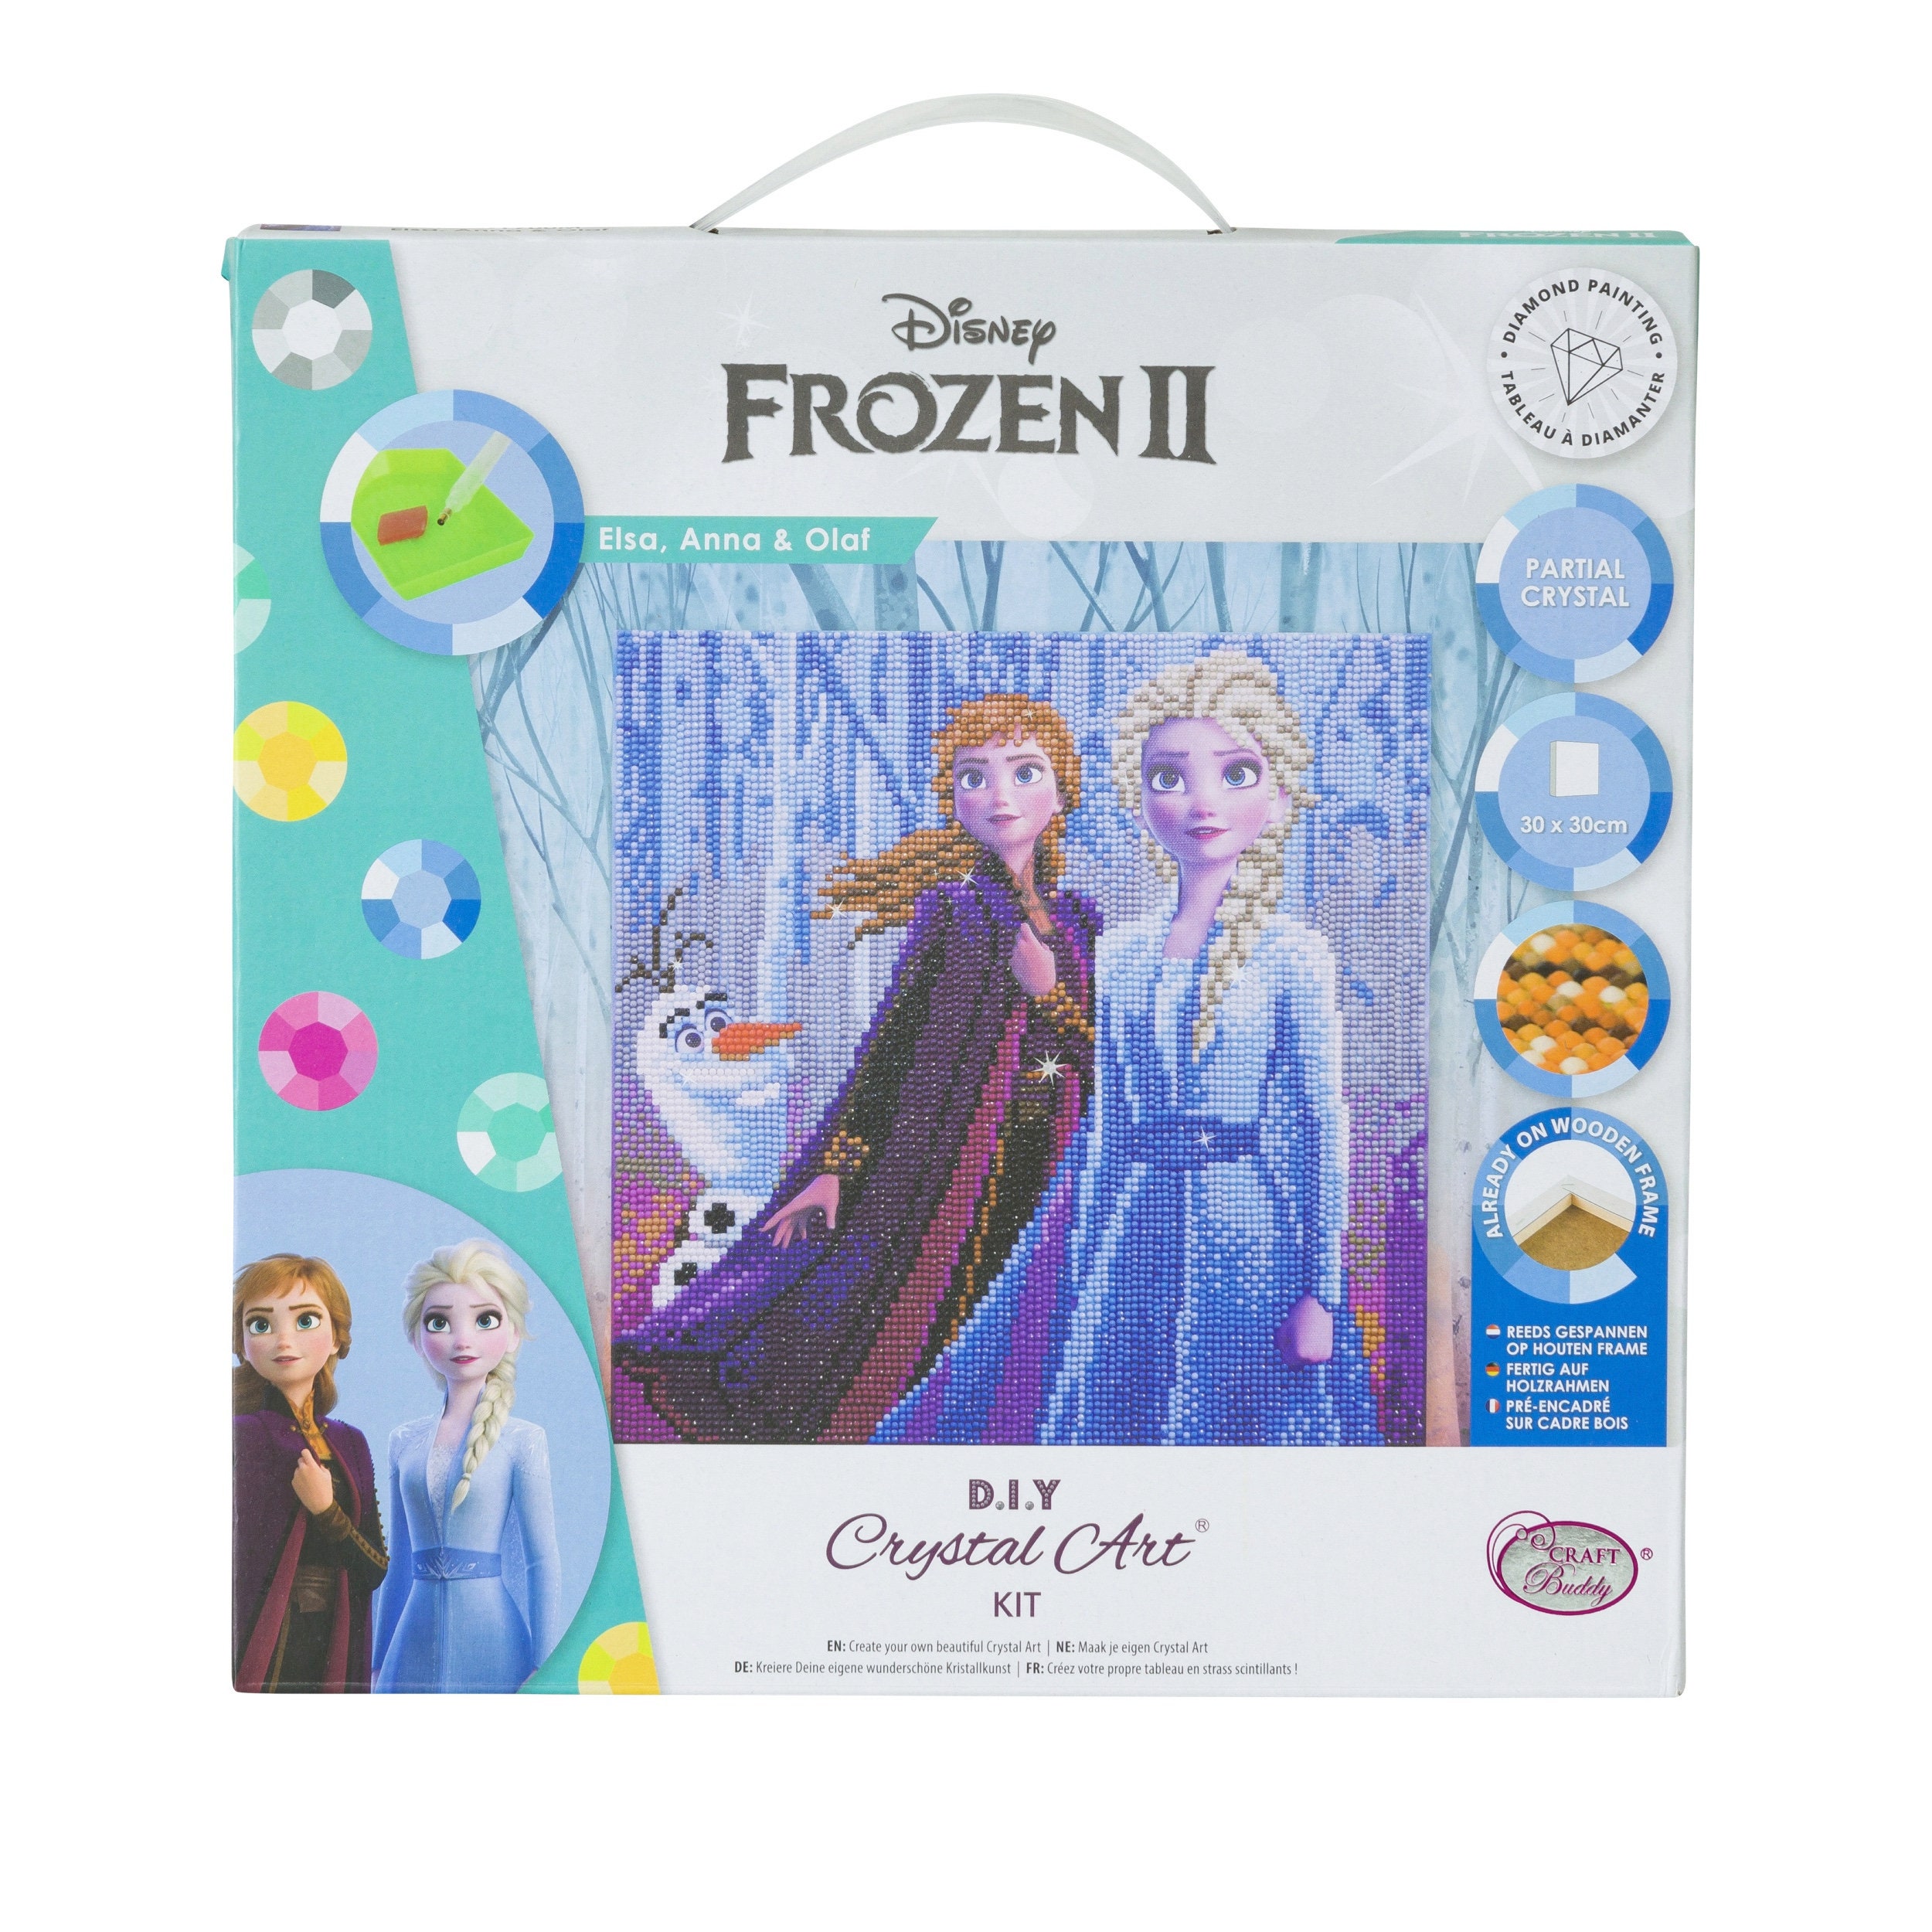 Disney Elsa Anna & Olaf Hang Art Picture by Ready X Like Hong Frozen Etsy Diamond Buddy, Kong to Cm Kit Once 30 Complete, DIY Craft Painting 30 - Crystal